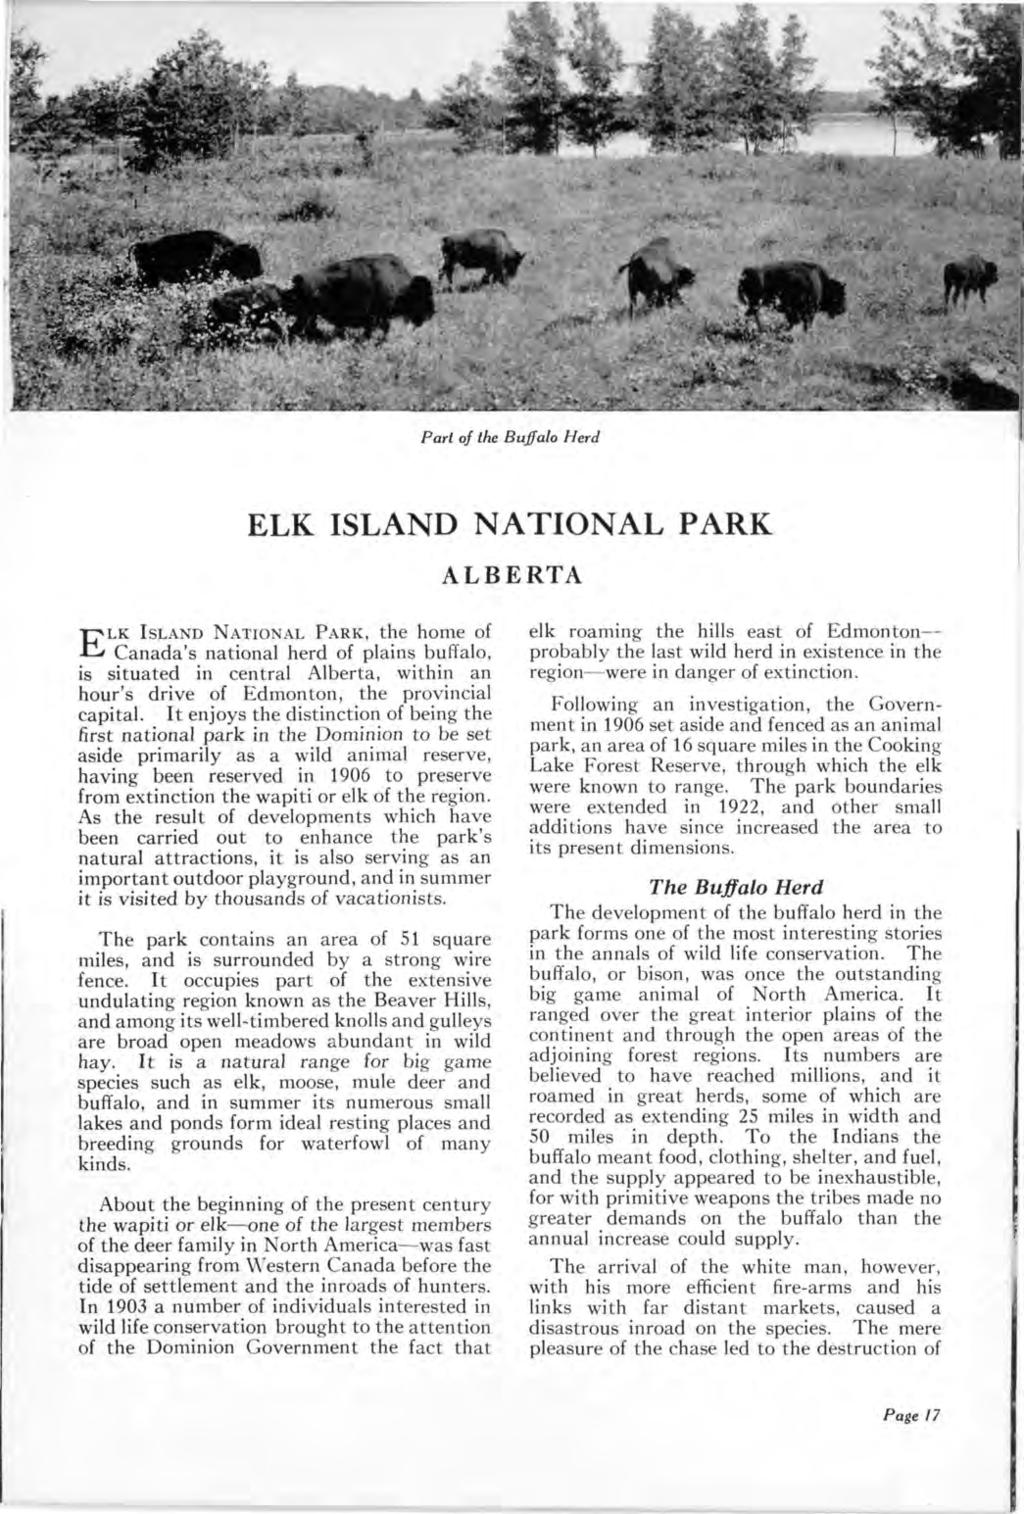 Part of the Buffalo Herd ELK ISLAND NATIONAL PARK ALBERTA LK ISLAND NATIONAL PARK, the home of E Canada's national herd of plains buffalo, is situated in central Alberta, within an hour's drive of